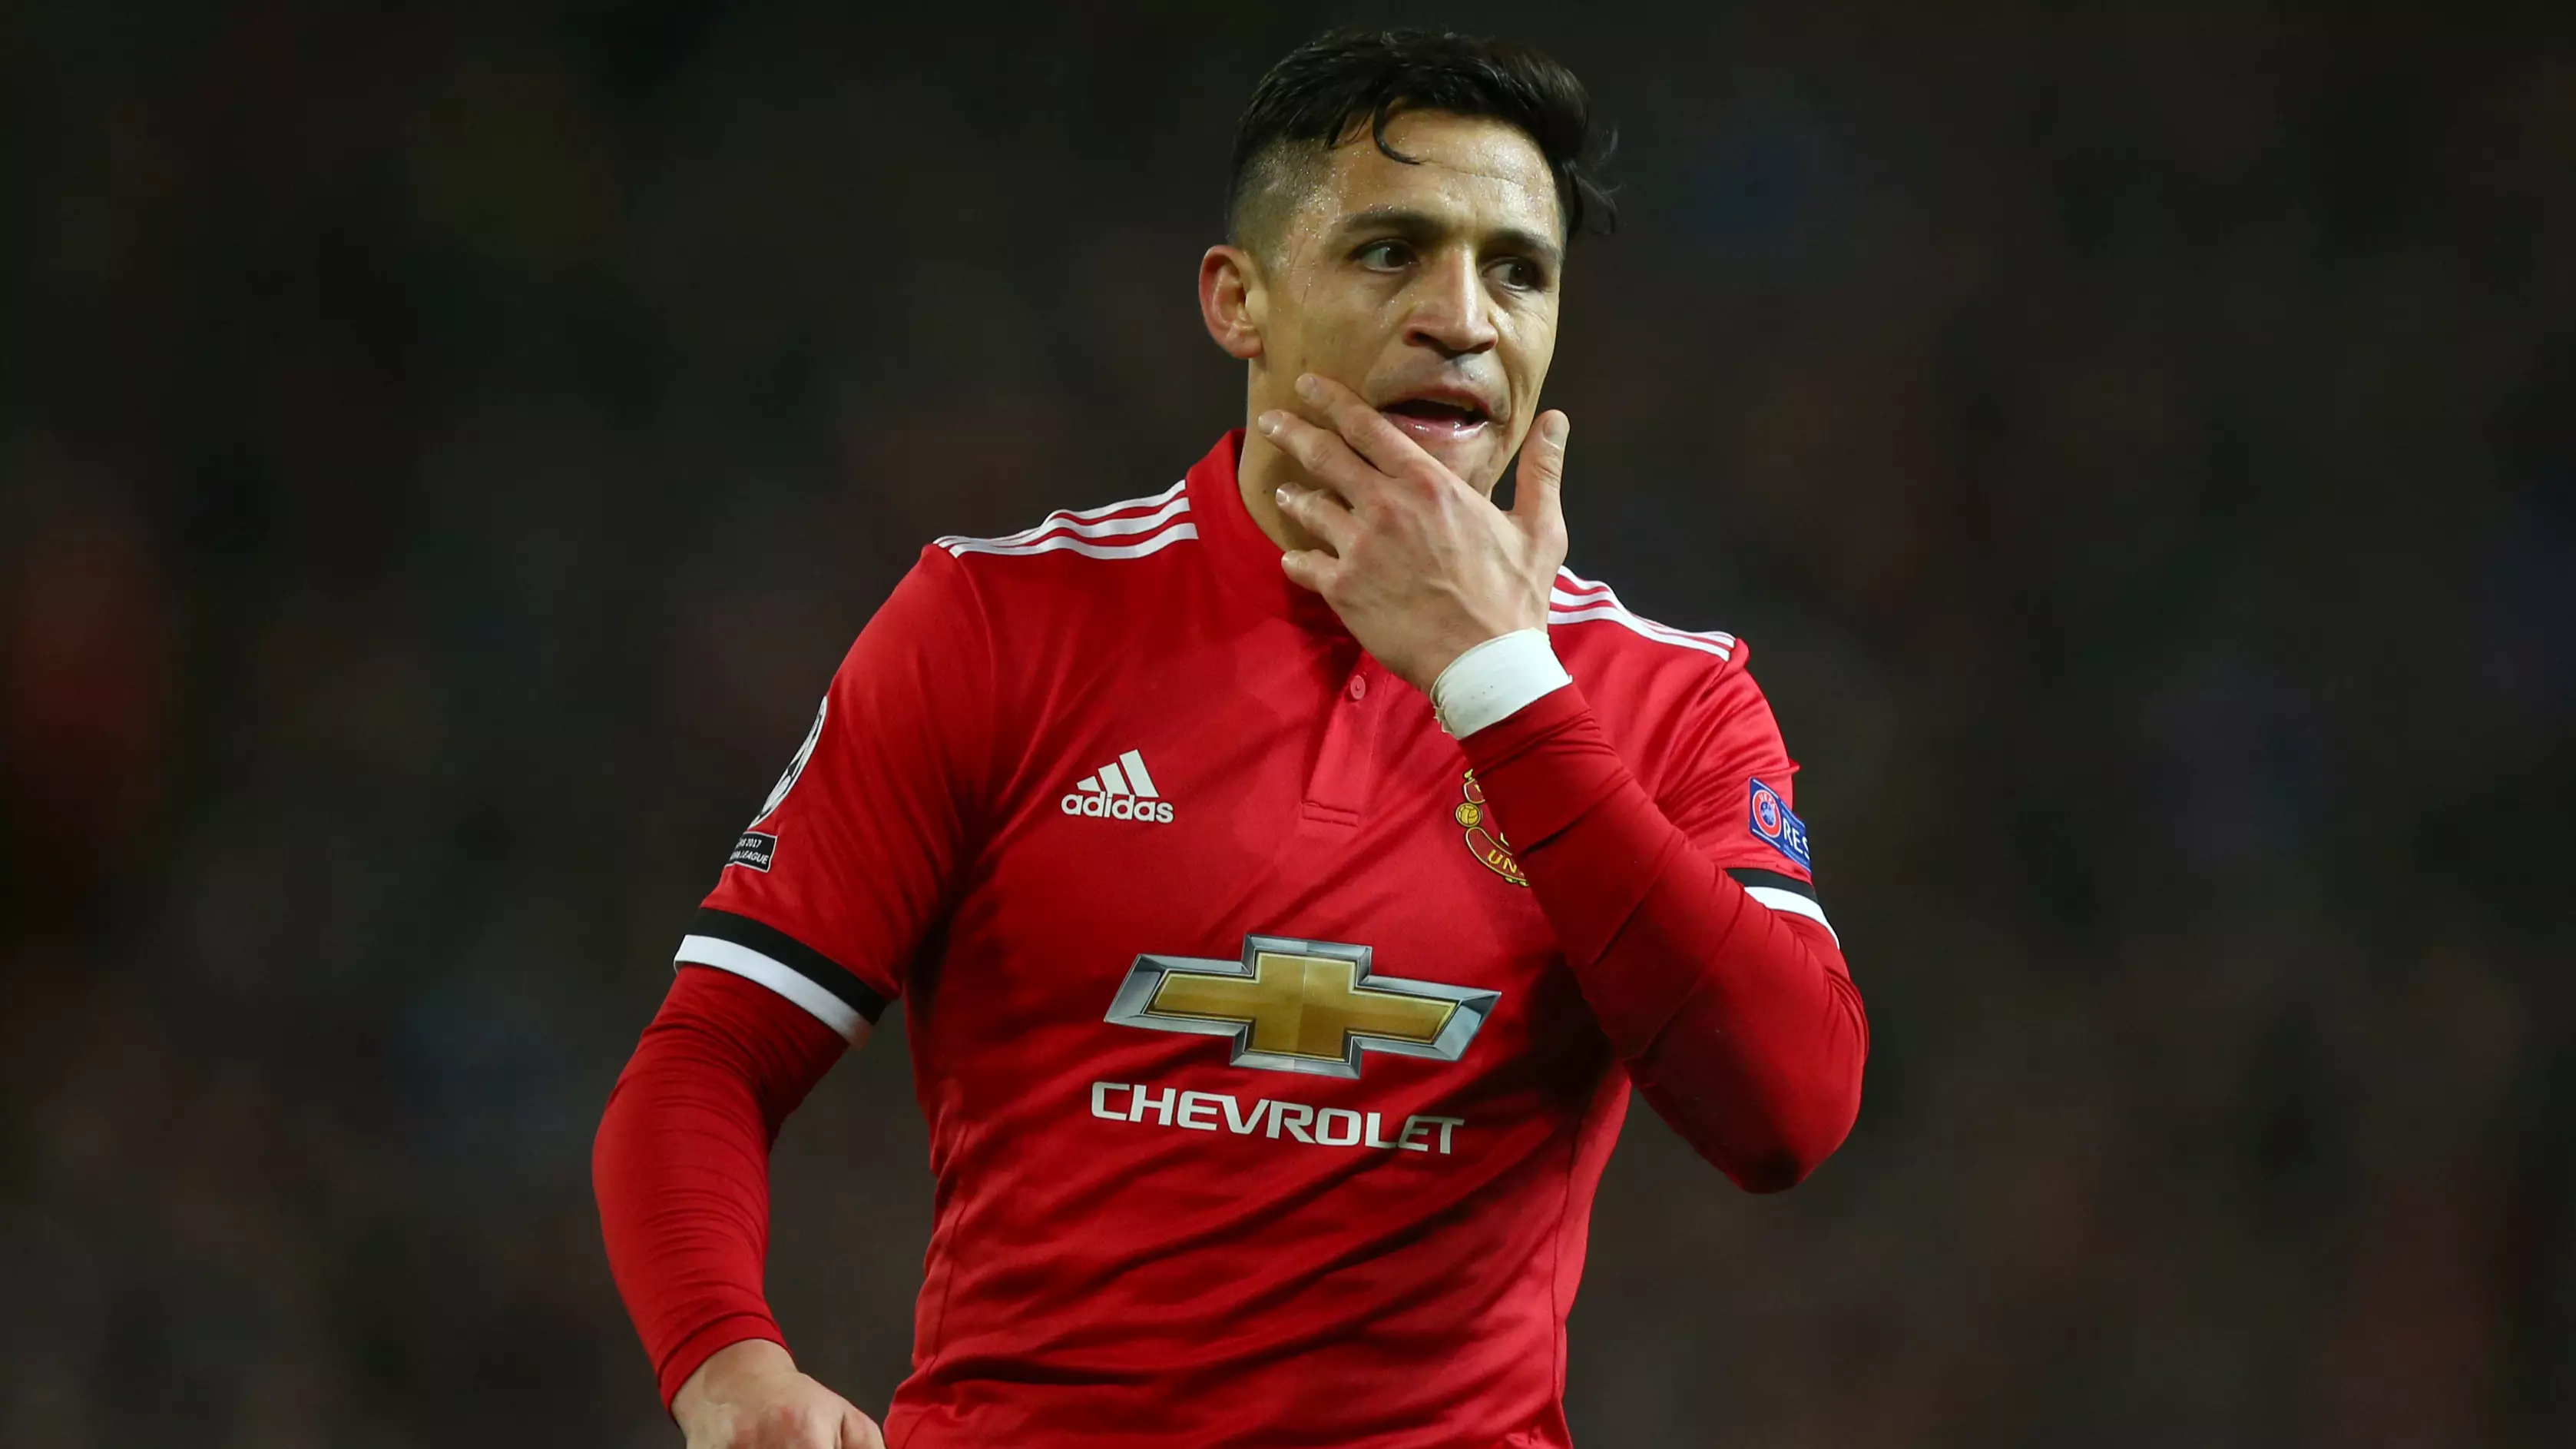 Sanchez is big enough to admit things haven't gone right at United so far. Image: PA Images